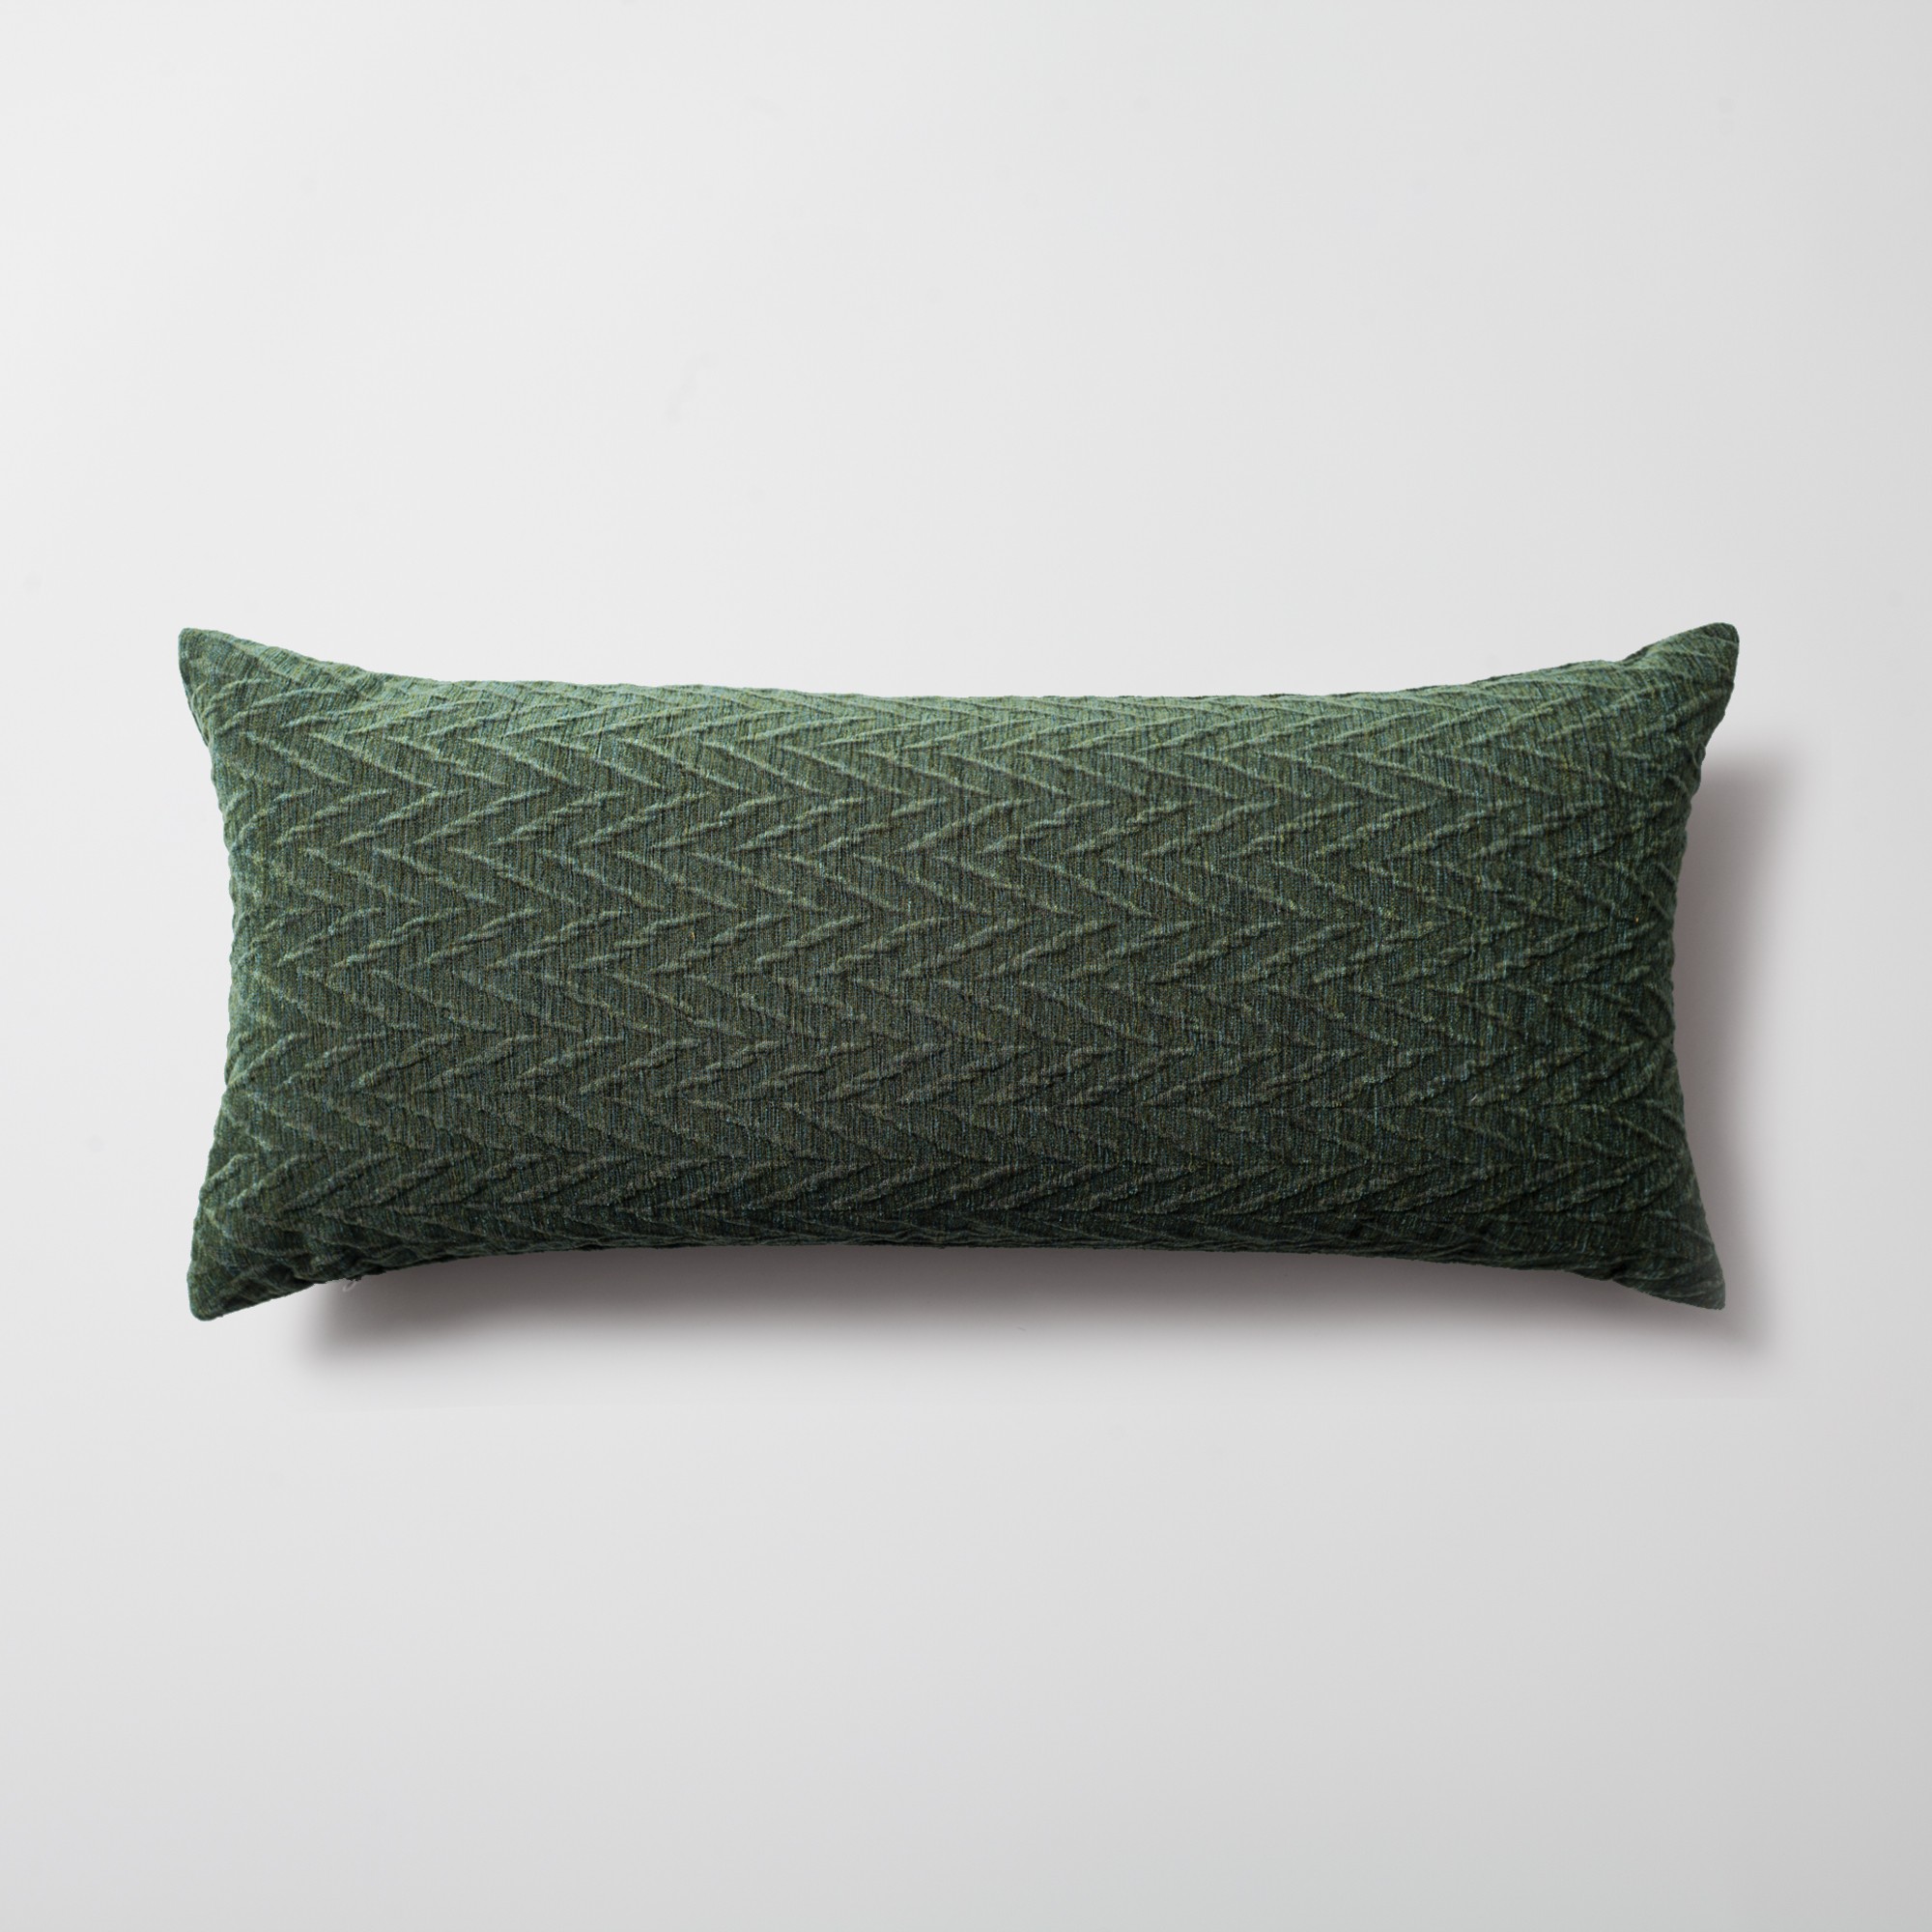 "Cello" - Embossed Pattern Cushion 14x28 Inch - Green (Cover Only)